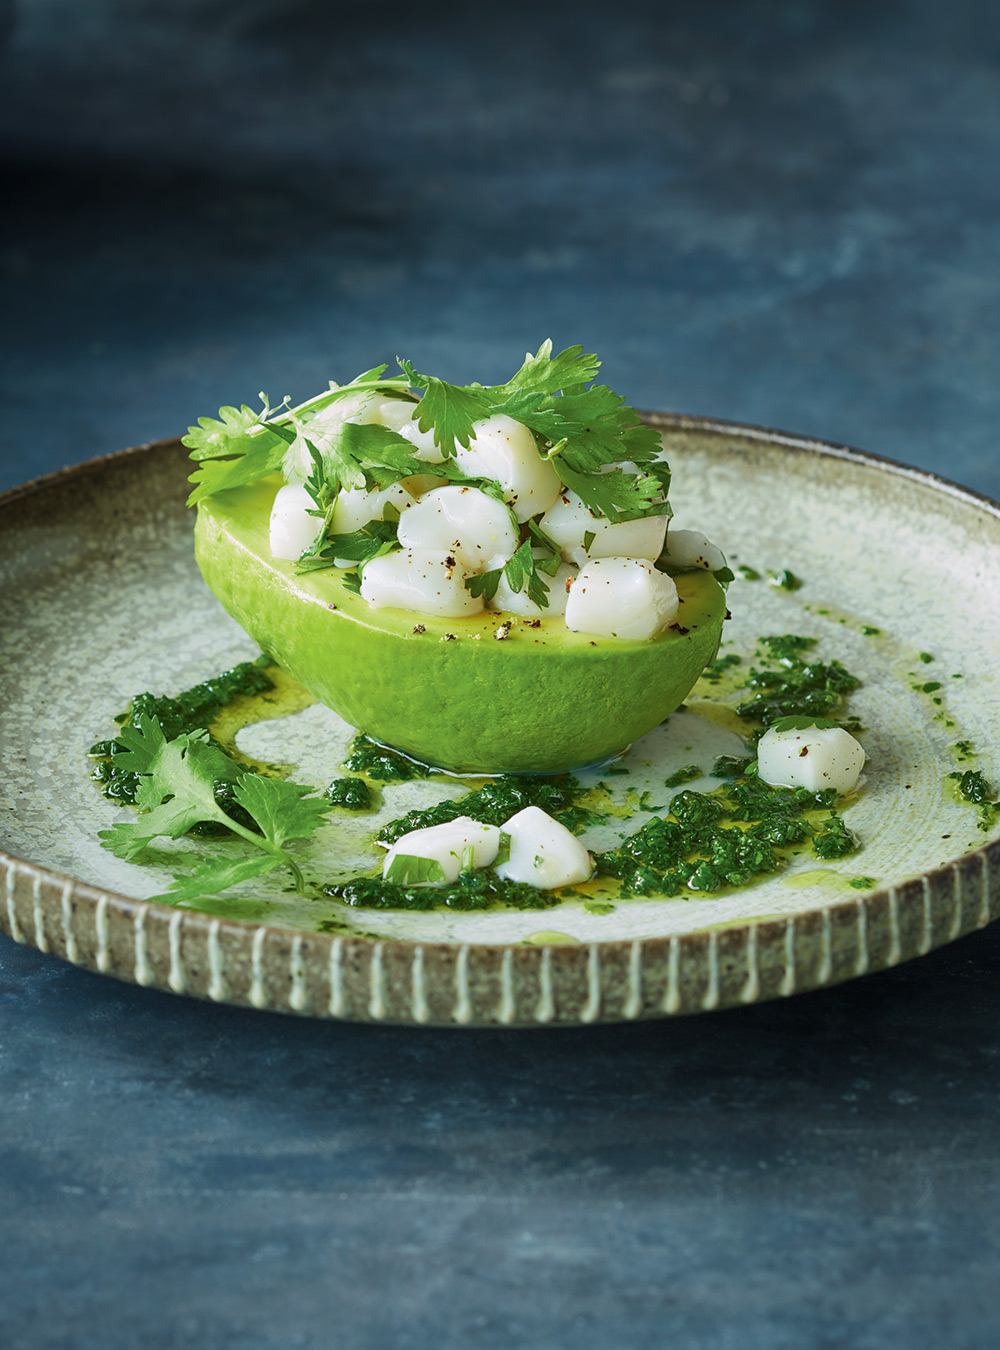 Avocados Stuffed with Scallop Ceviche